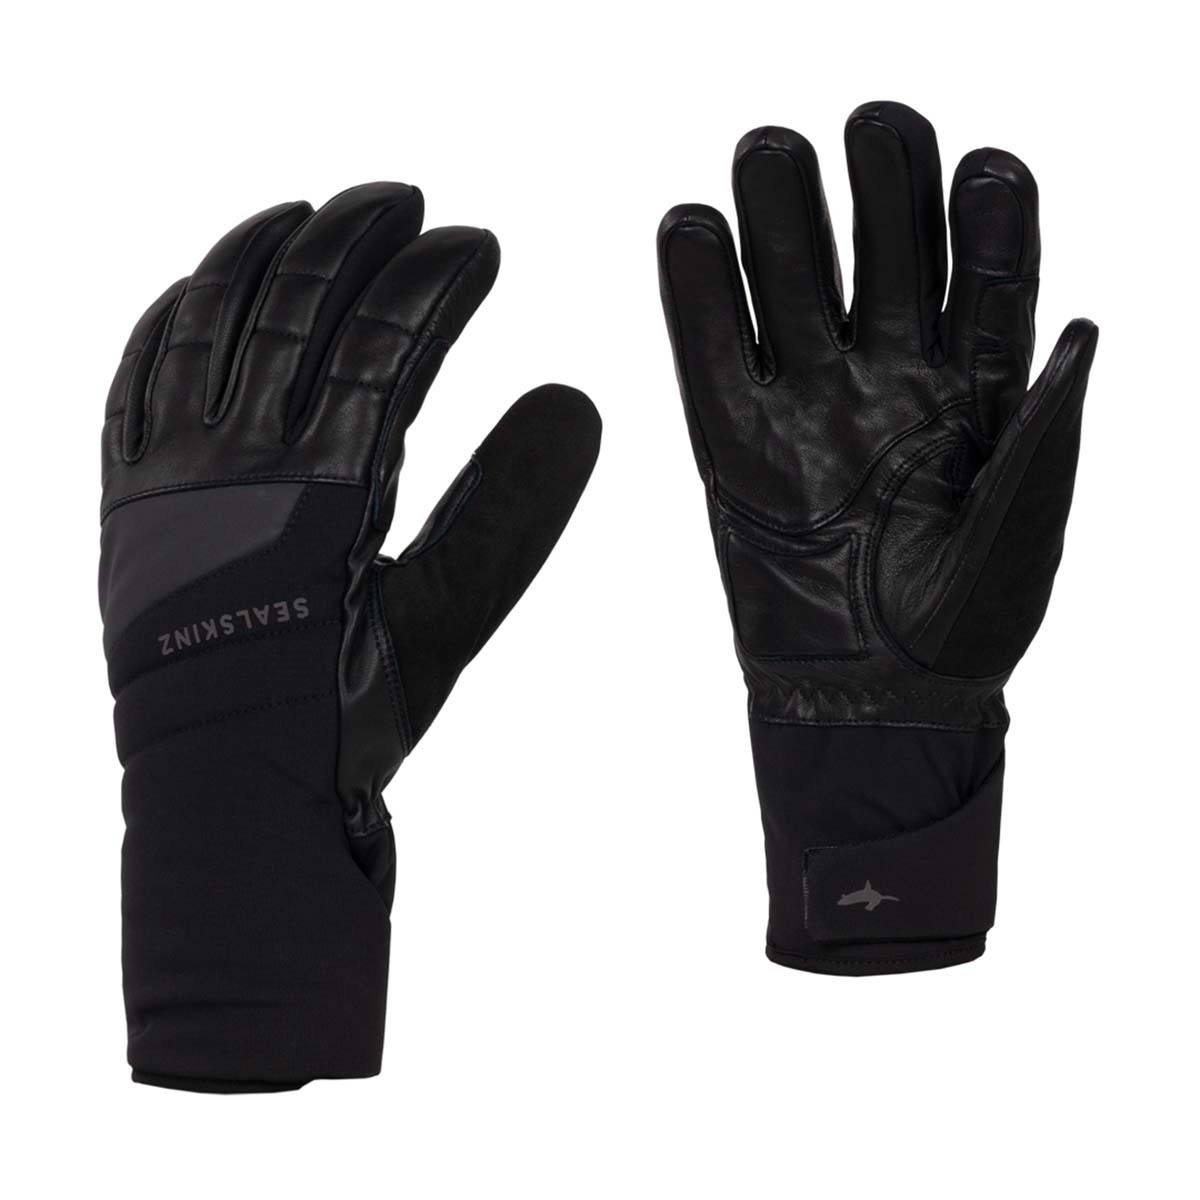 Sealskinz Waterproof Extreme Cold weather Insulated Cycle glove with Fusion Control - Black